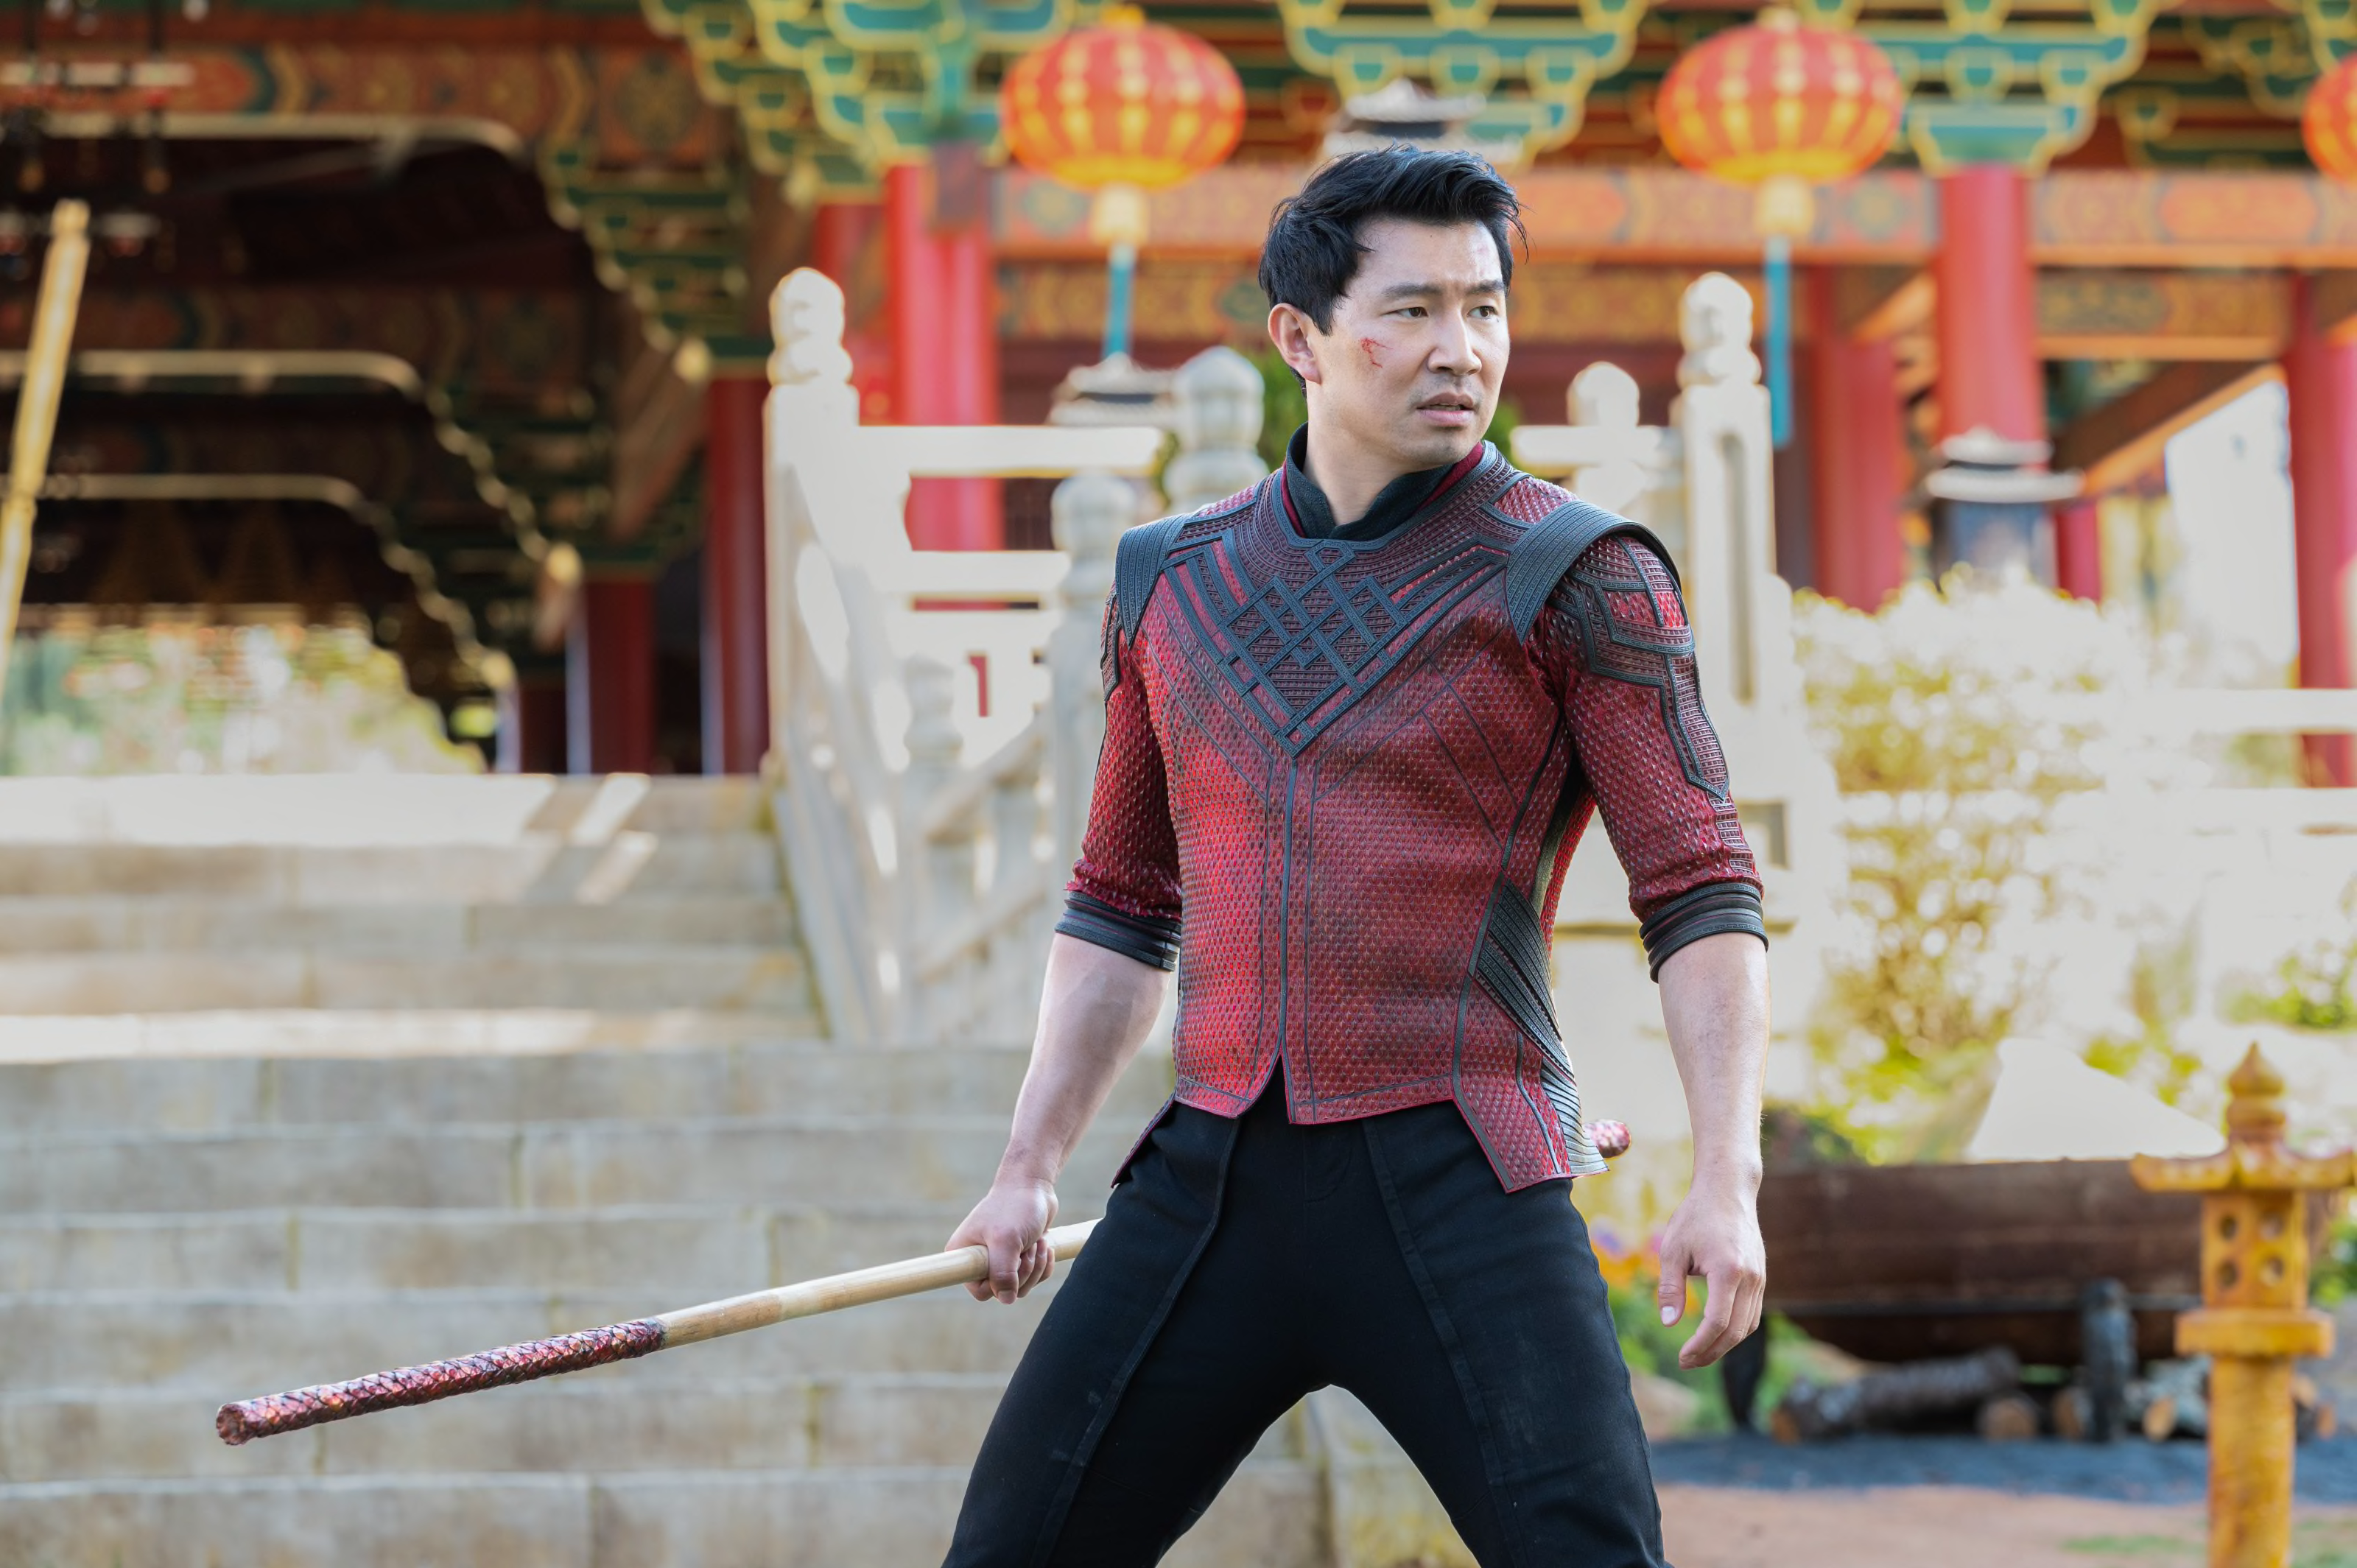 Shang-Chi and the Legend of the Ten Rings' most significant MCU connections